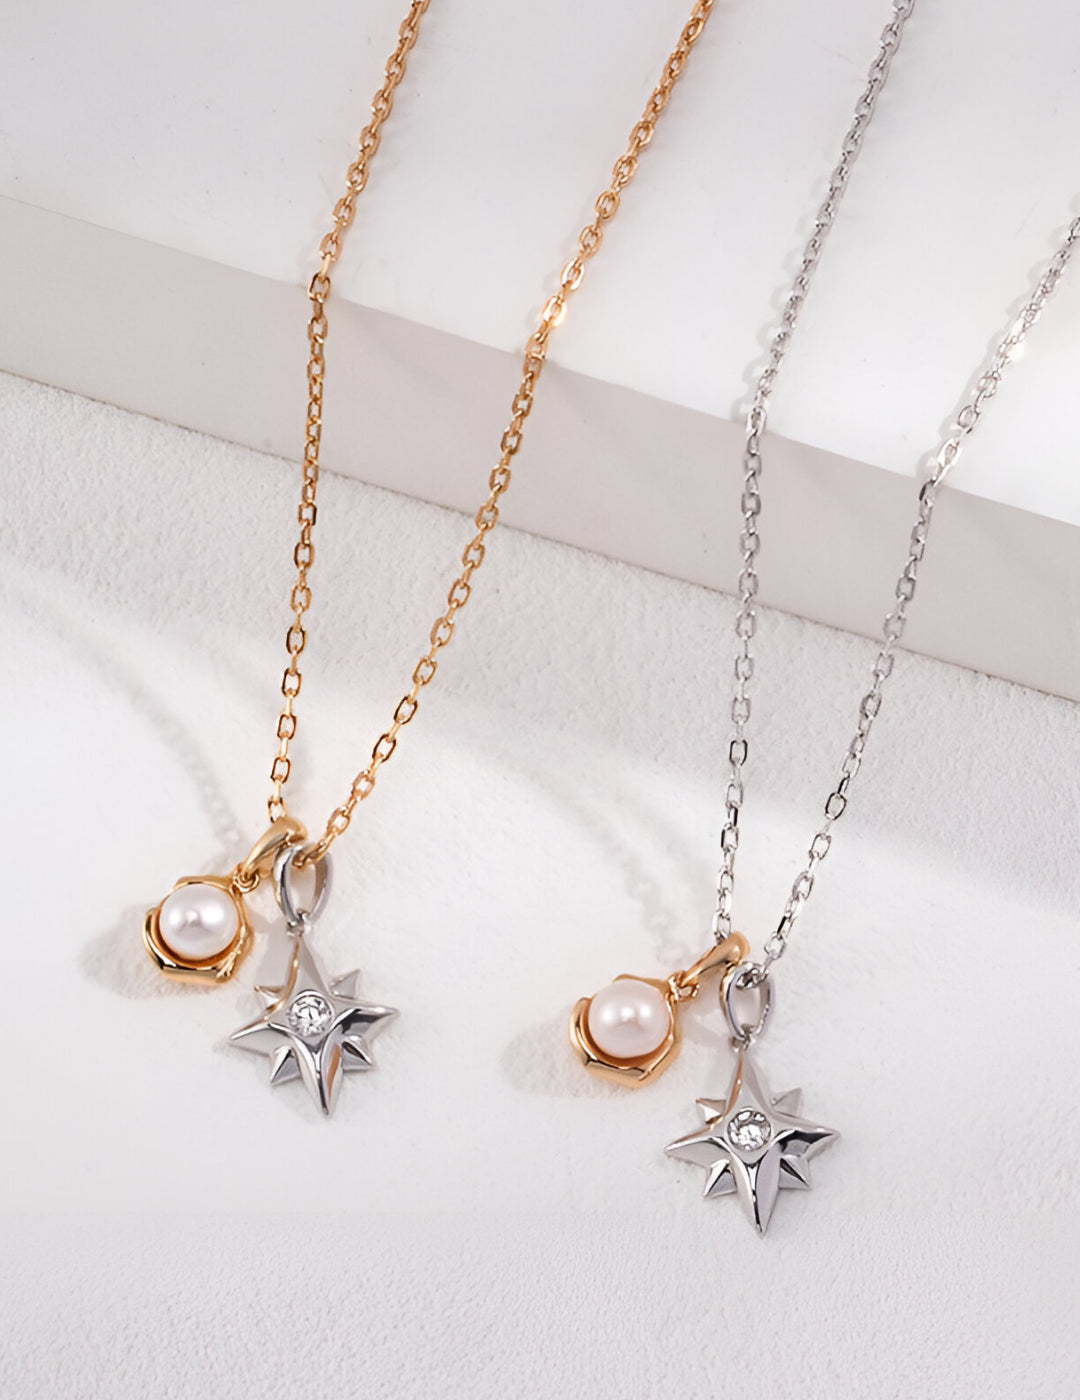 Moon and Star Exquisite Necklace - S925 Sterling Silver with 18K Gold Vermeil  and Zircon- Pearl Luminance - Celestial allure  - a celestial masterpiece that will captivate your heart